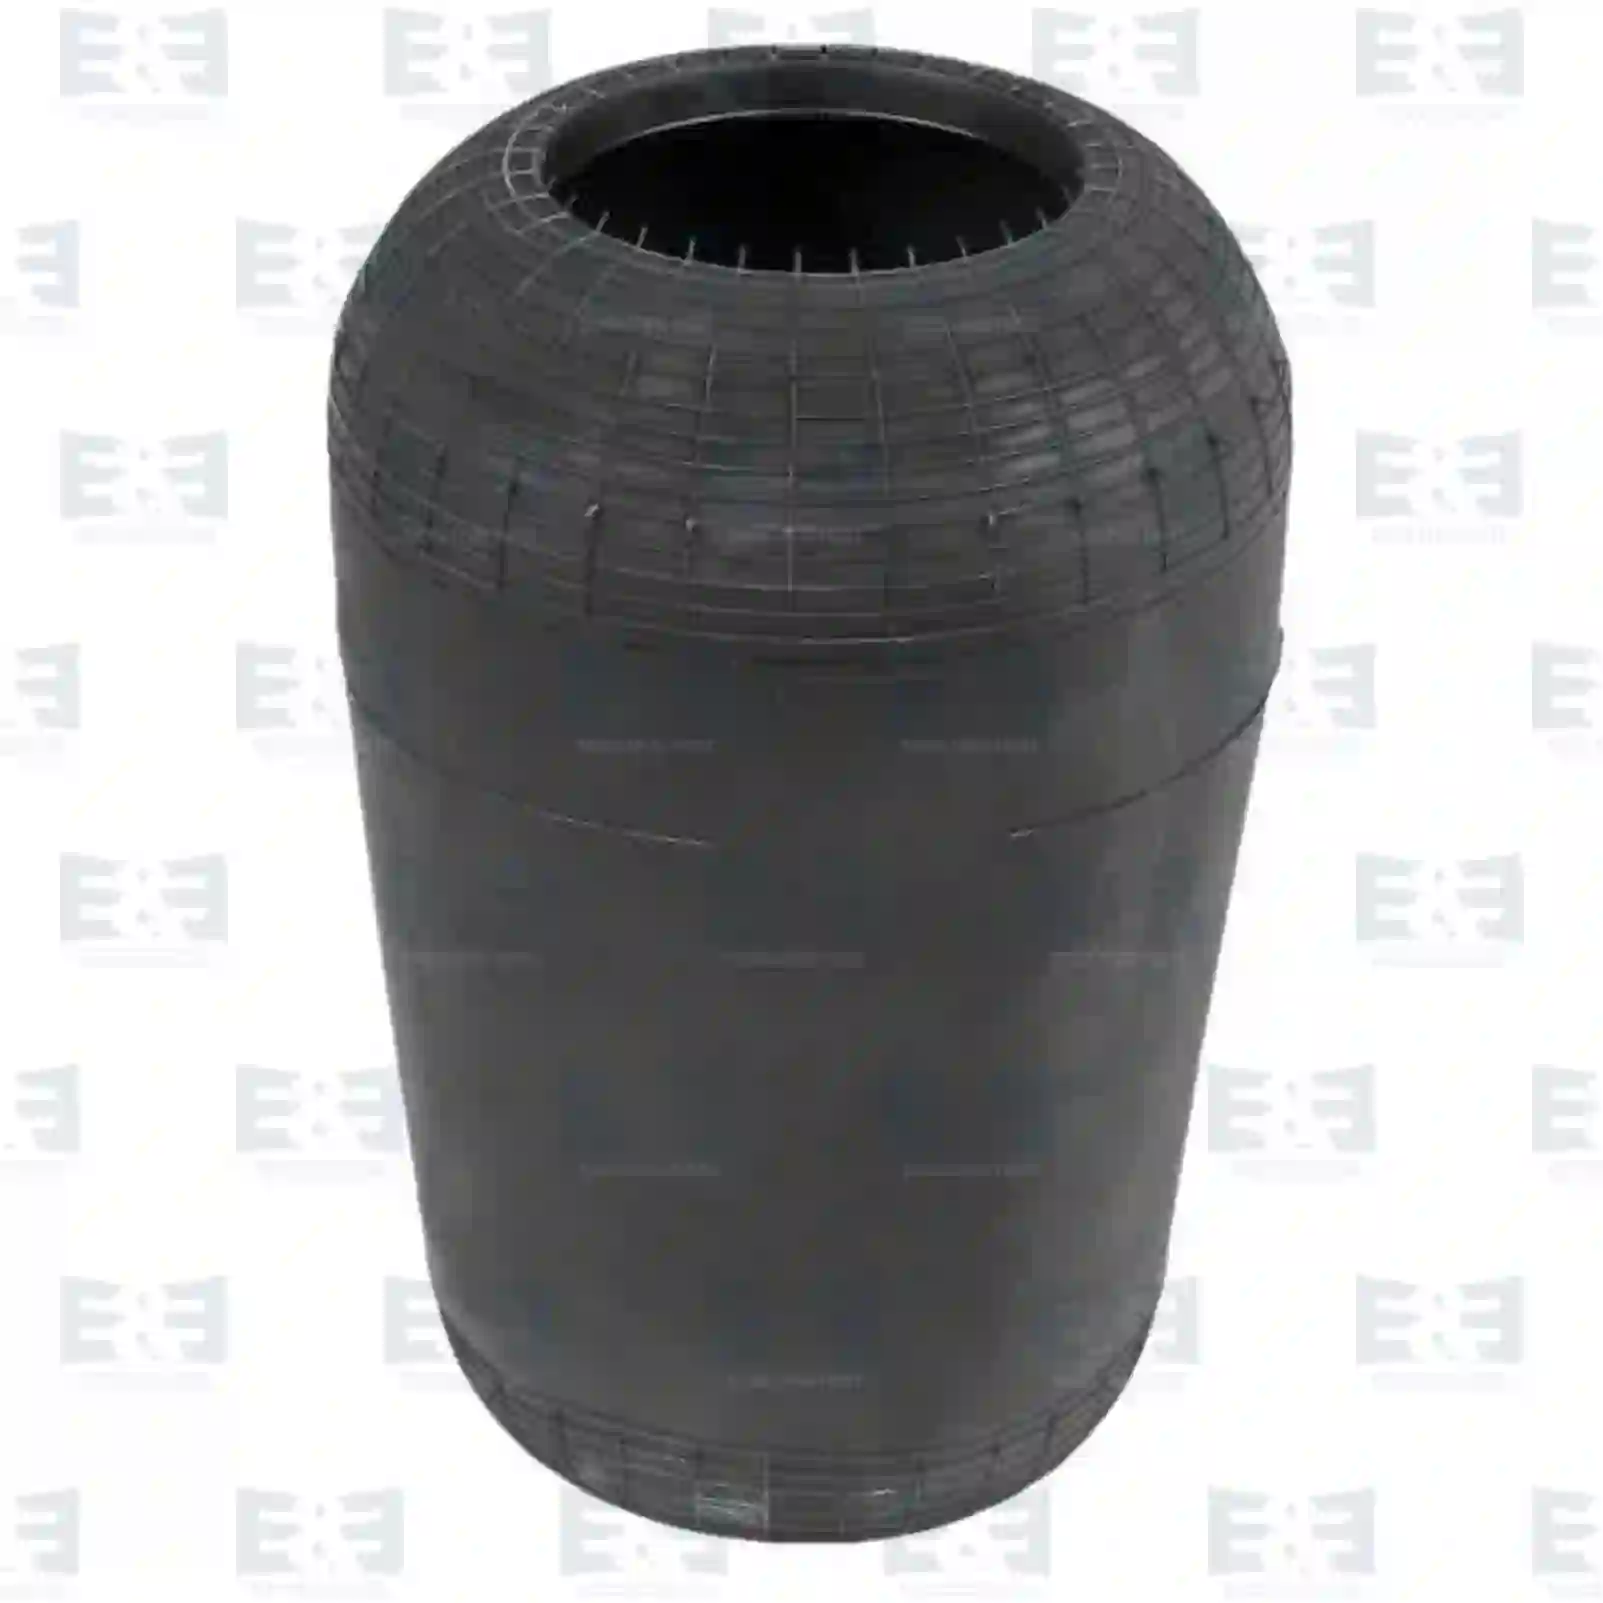 Air Bellow Air spring, without piston, EE No 2E2283063 ,  oem no:0627584, 627584, 02491566, 81436010129, 81436010136, 178623, 325993, 3833270001, 383327000110, 6213280001, 0627584, 627584, 1611776, ZG40813-0008 E&E Truck Spare Parts | Truck Spare Parts, Auotomotive Spare Parts